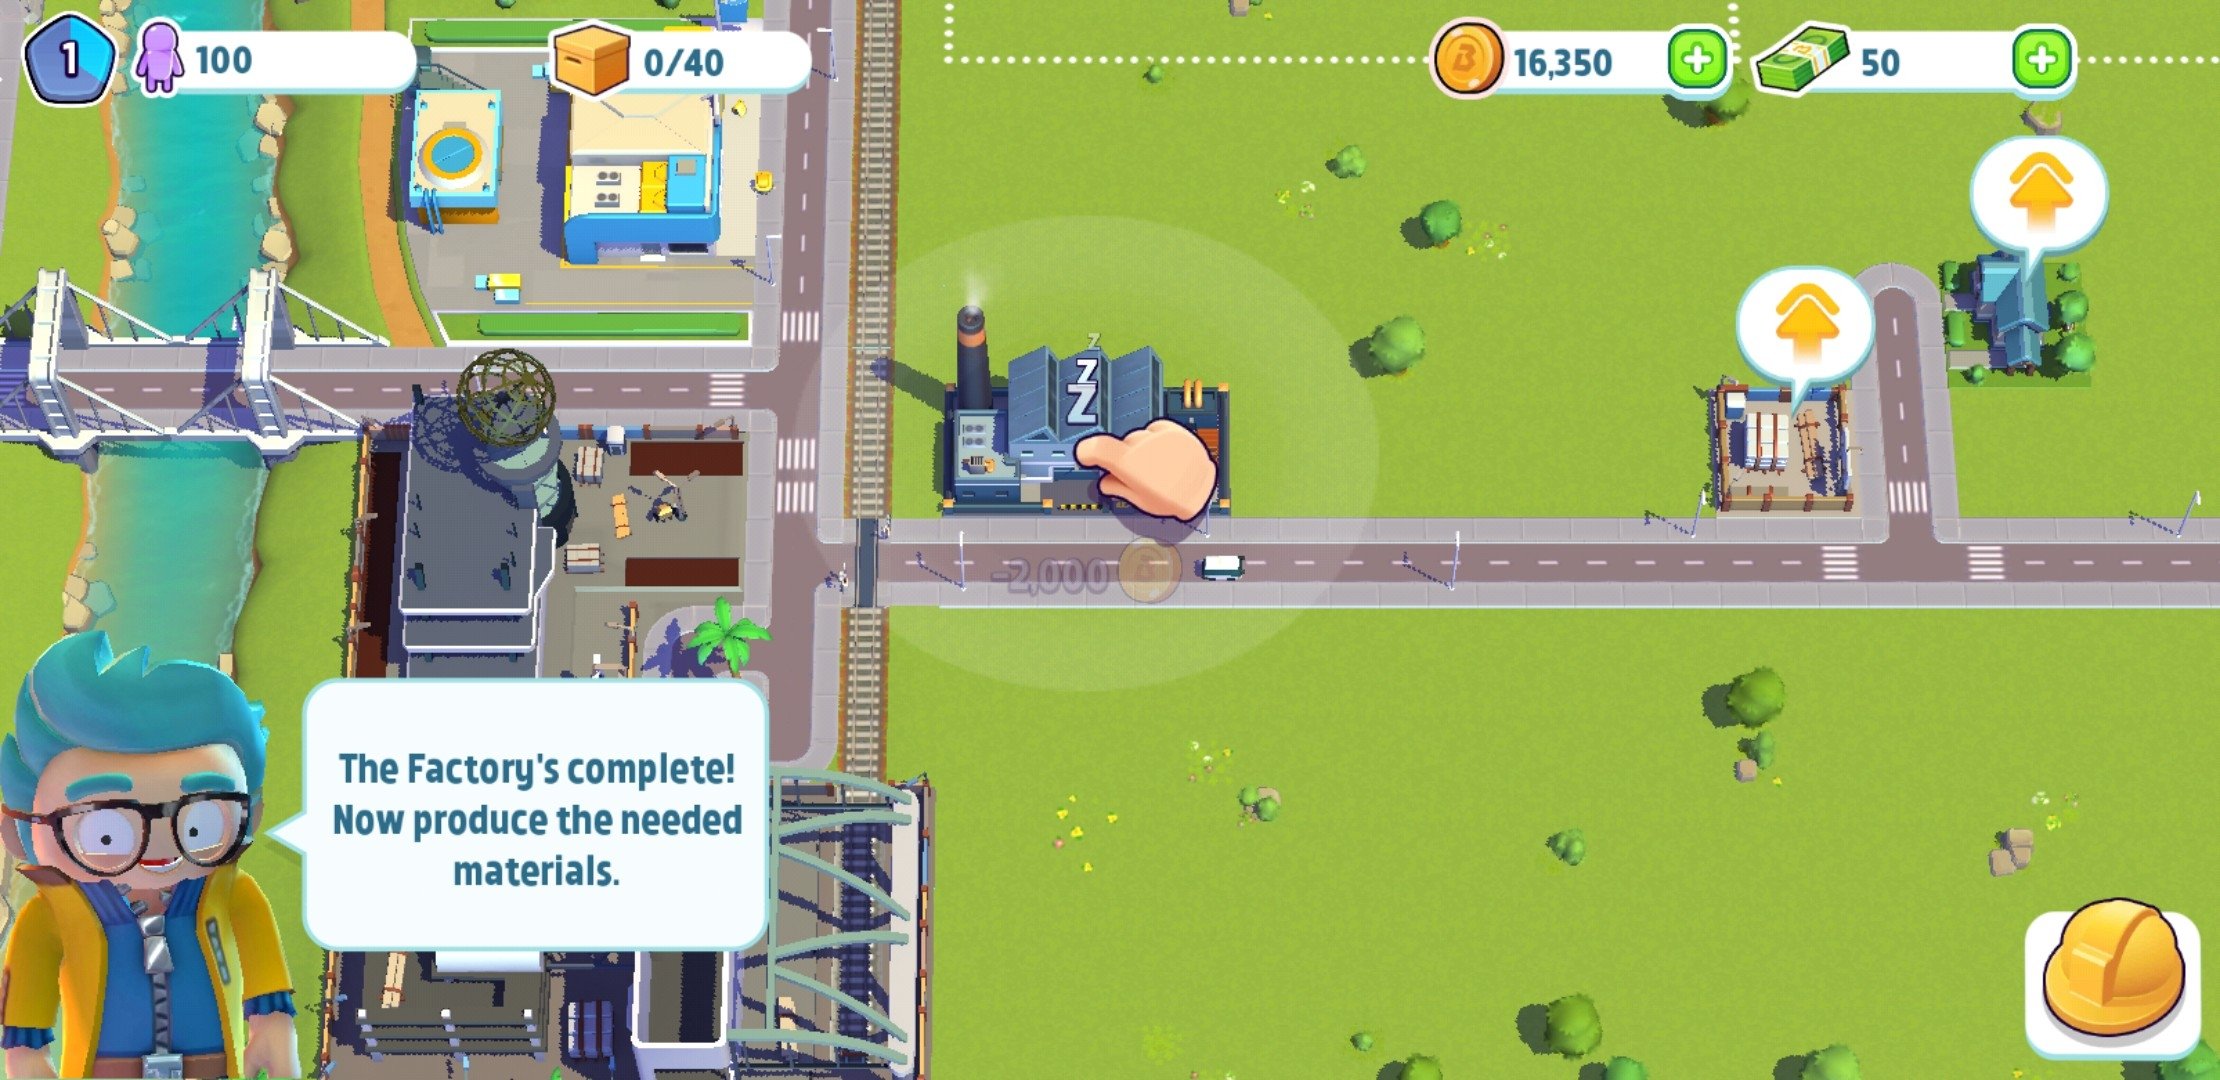 city mania: town building game android